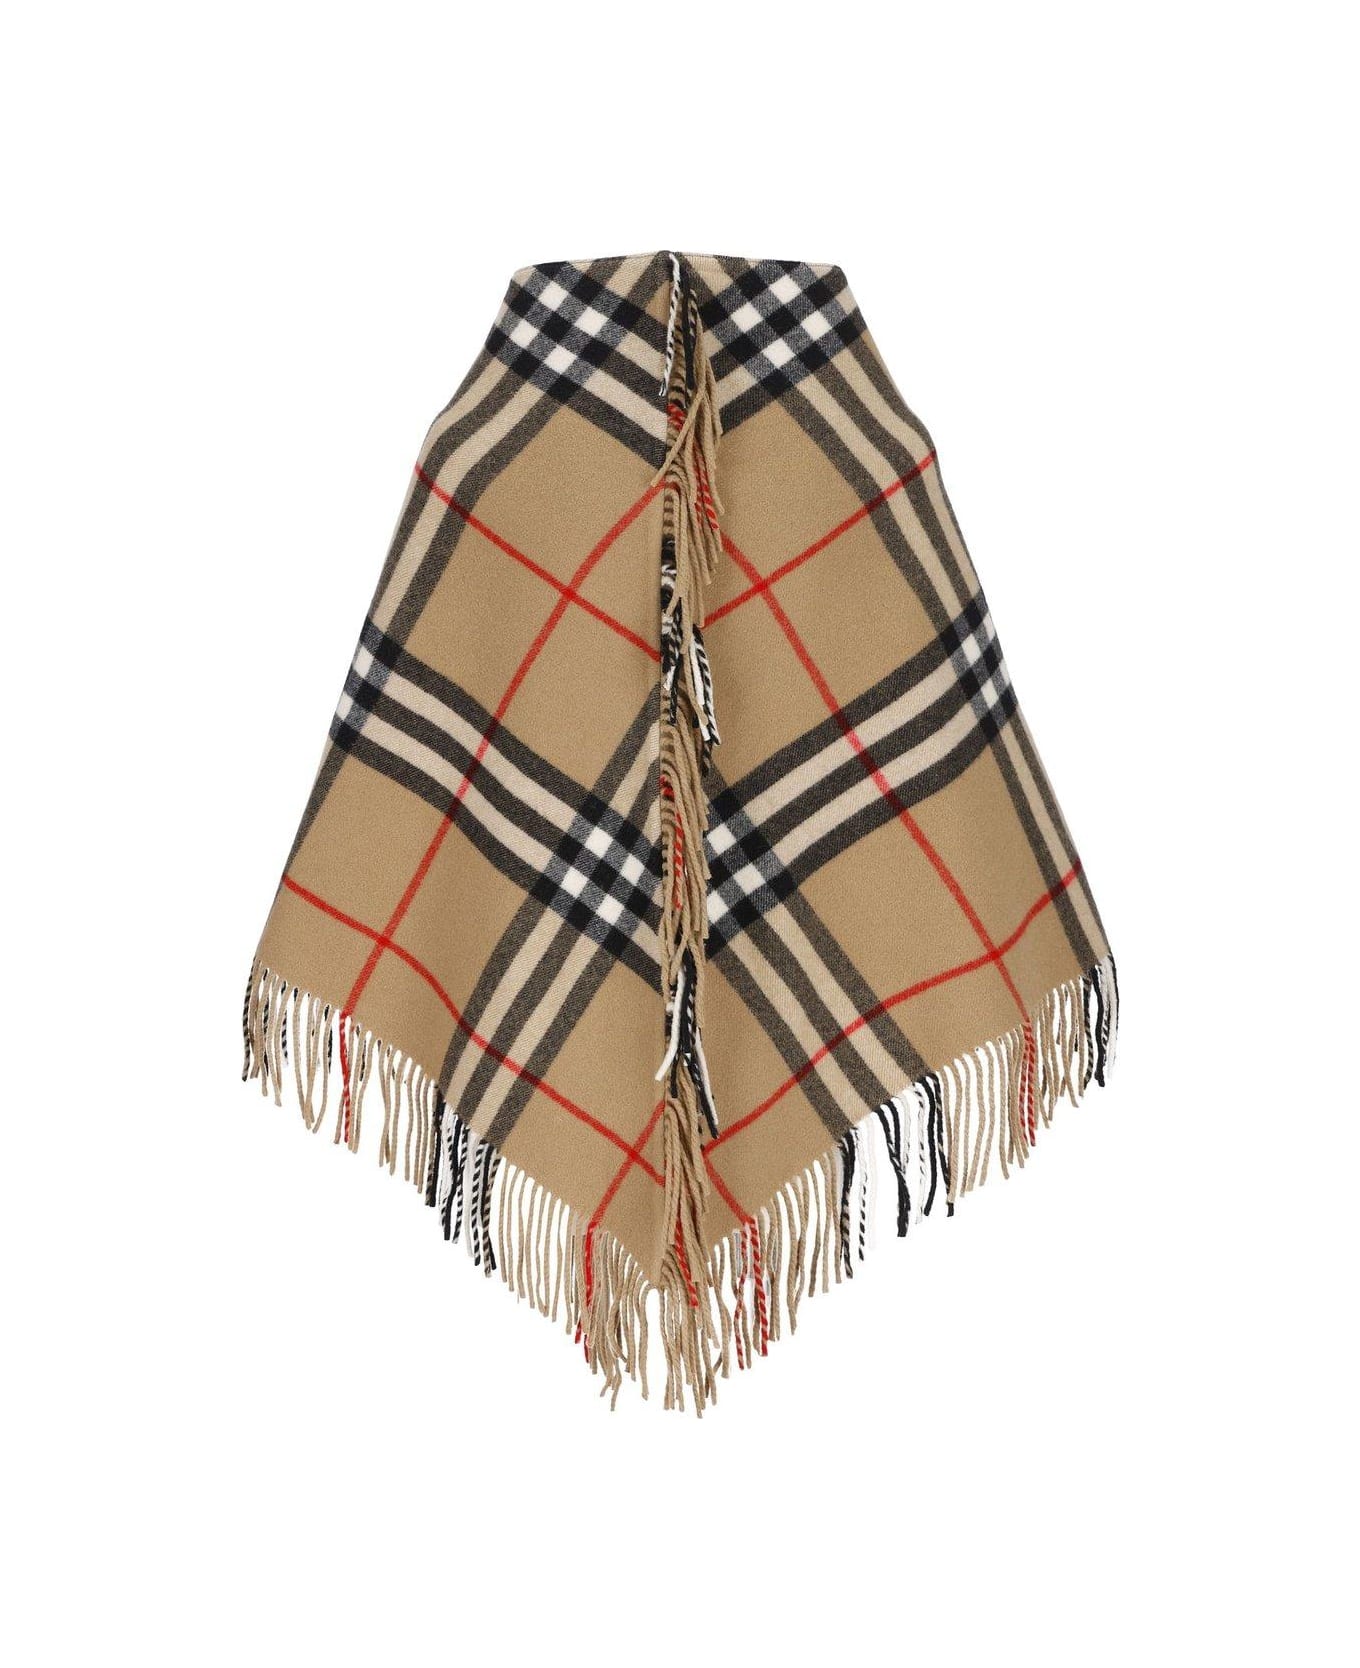 Burberry Check Printed Fringed Cape - Archive Beige